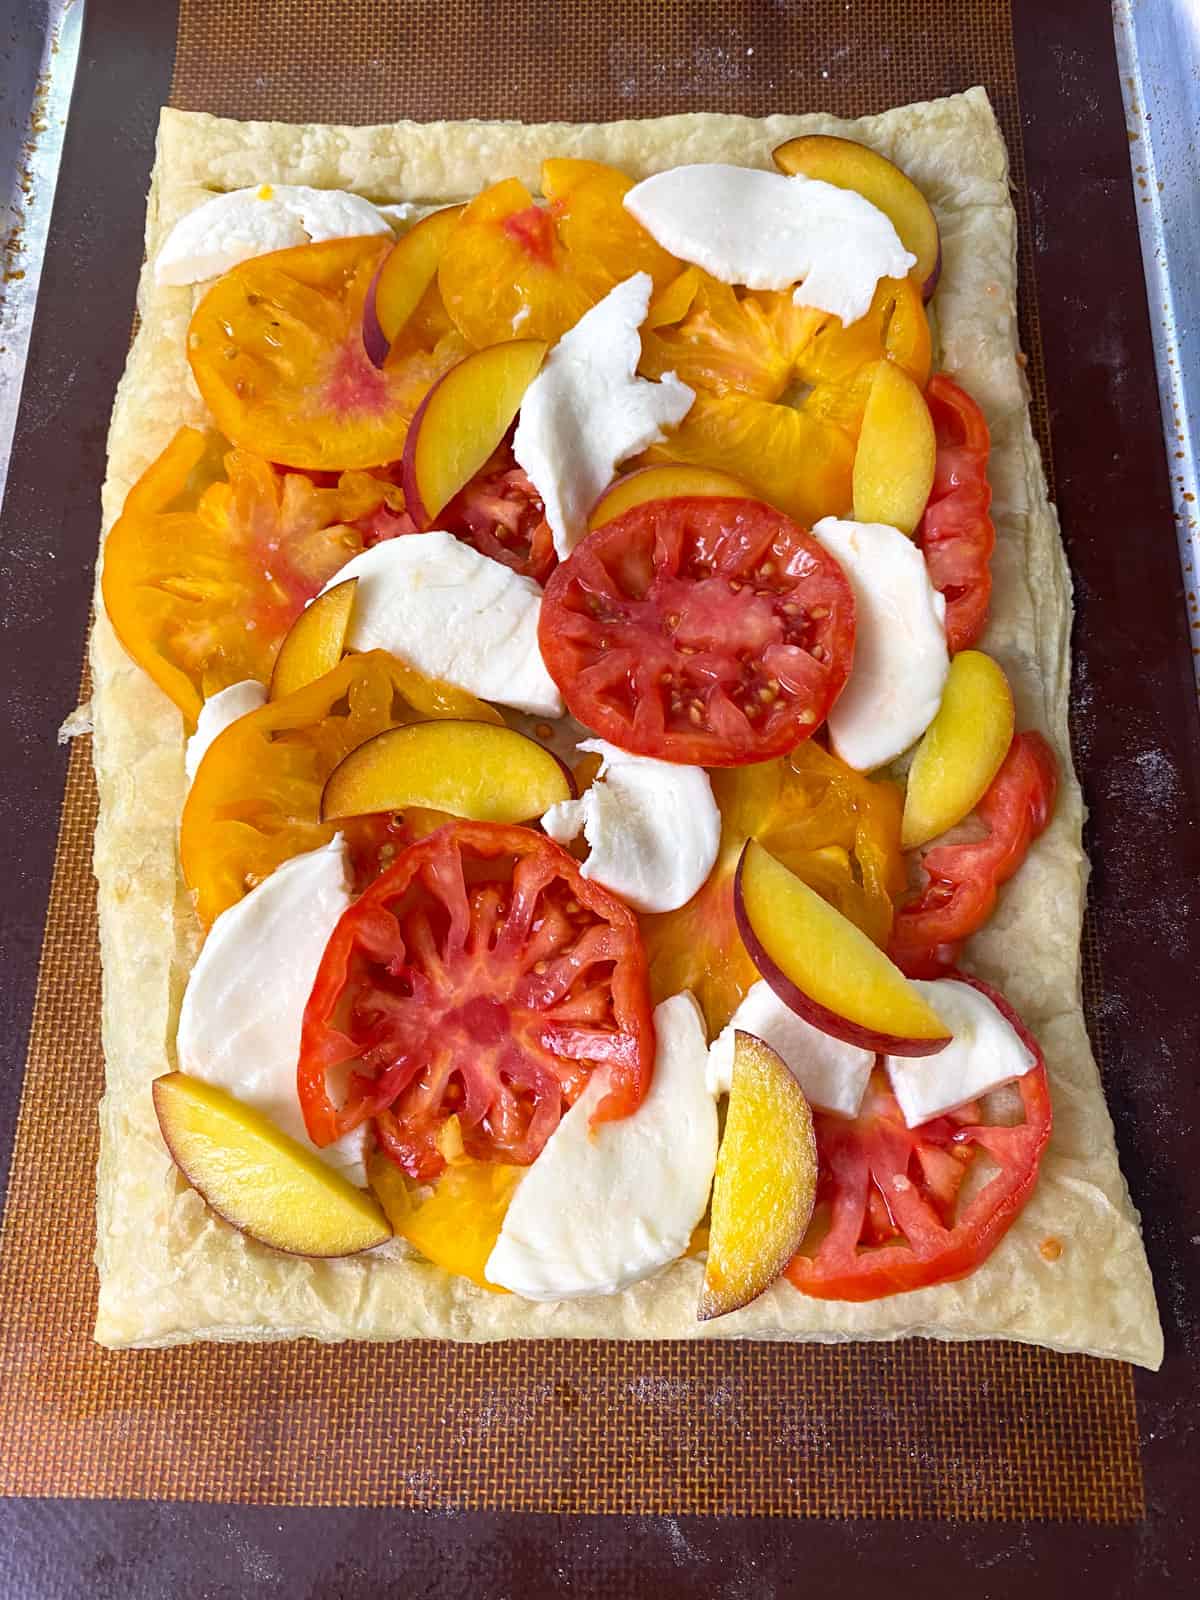 Layer the puff pastry with mozzarella, slices of heirloom tomato and sliced peaches.